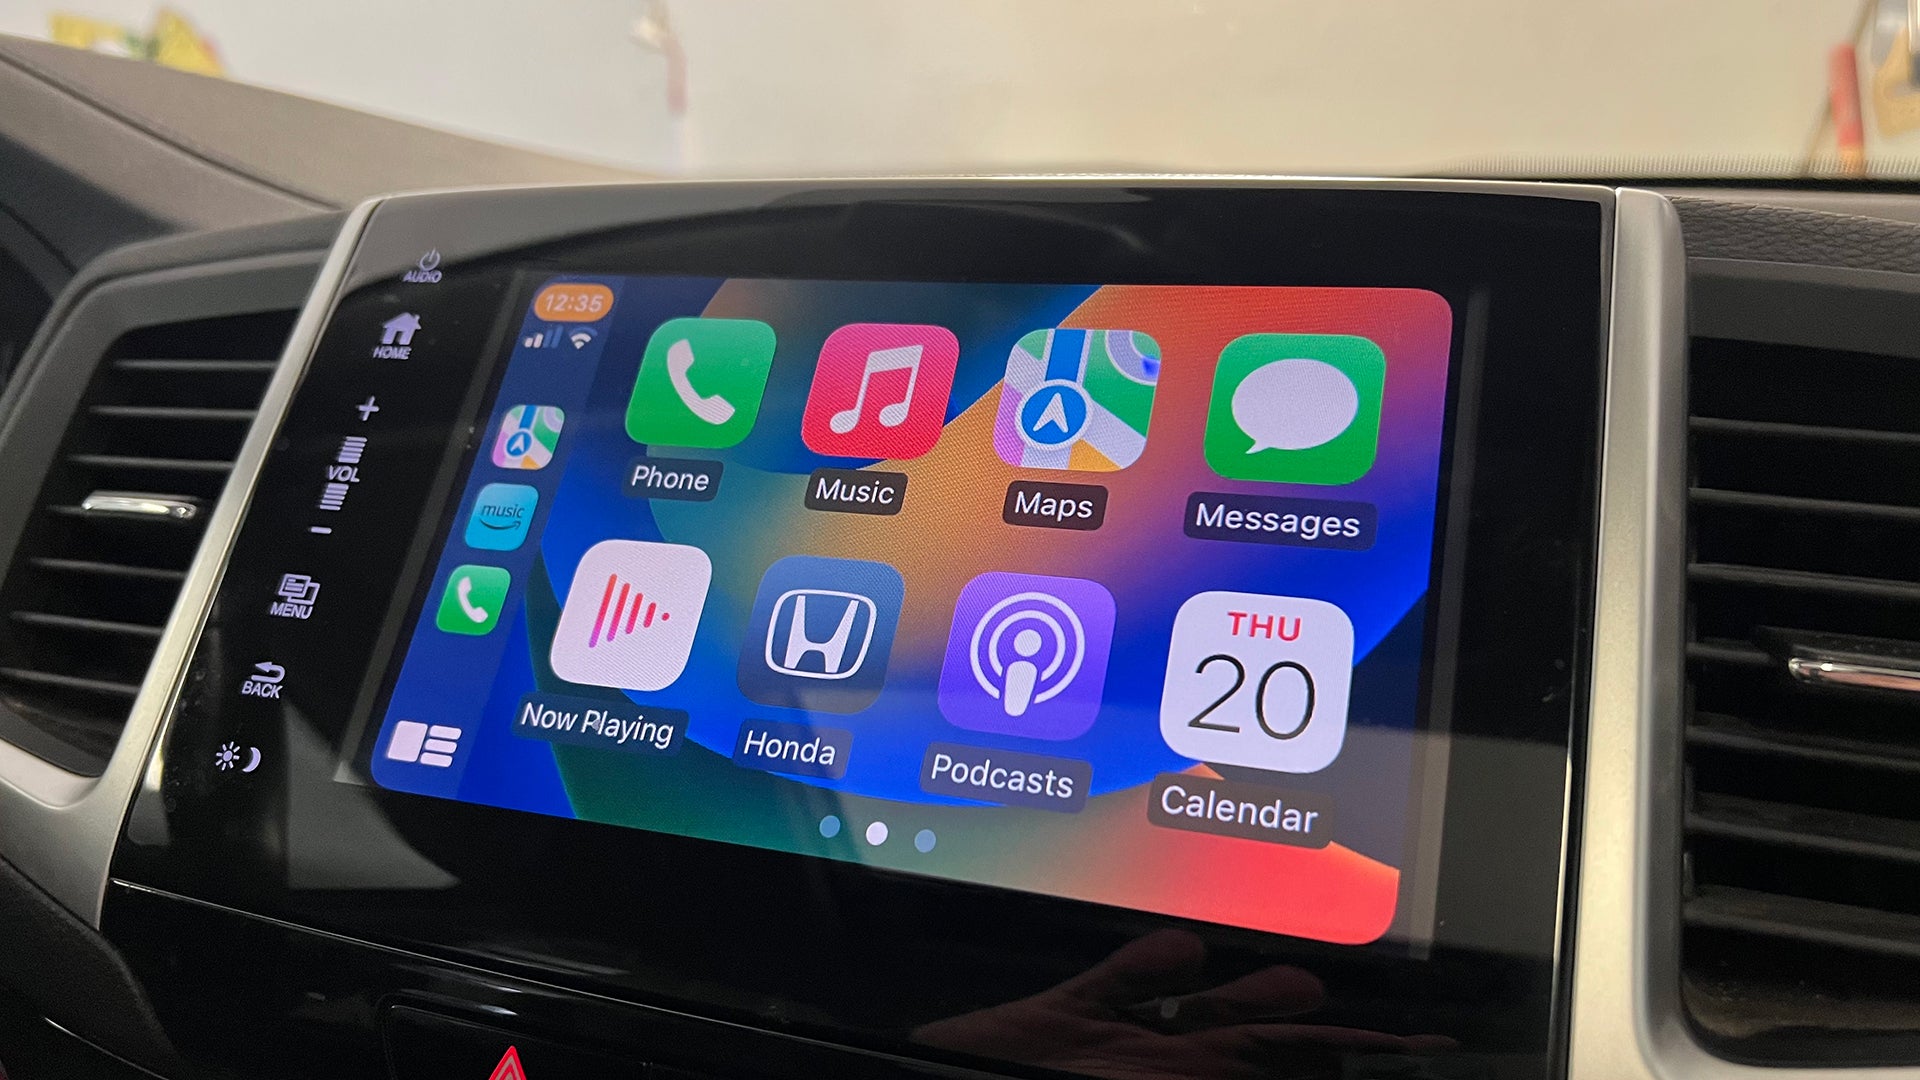 How does Apple CarPlay work and what are its advantages?